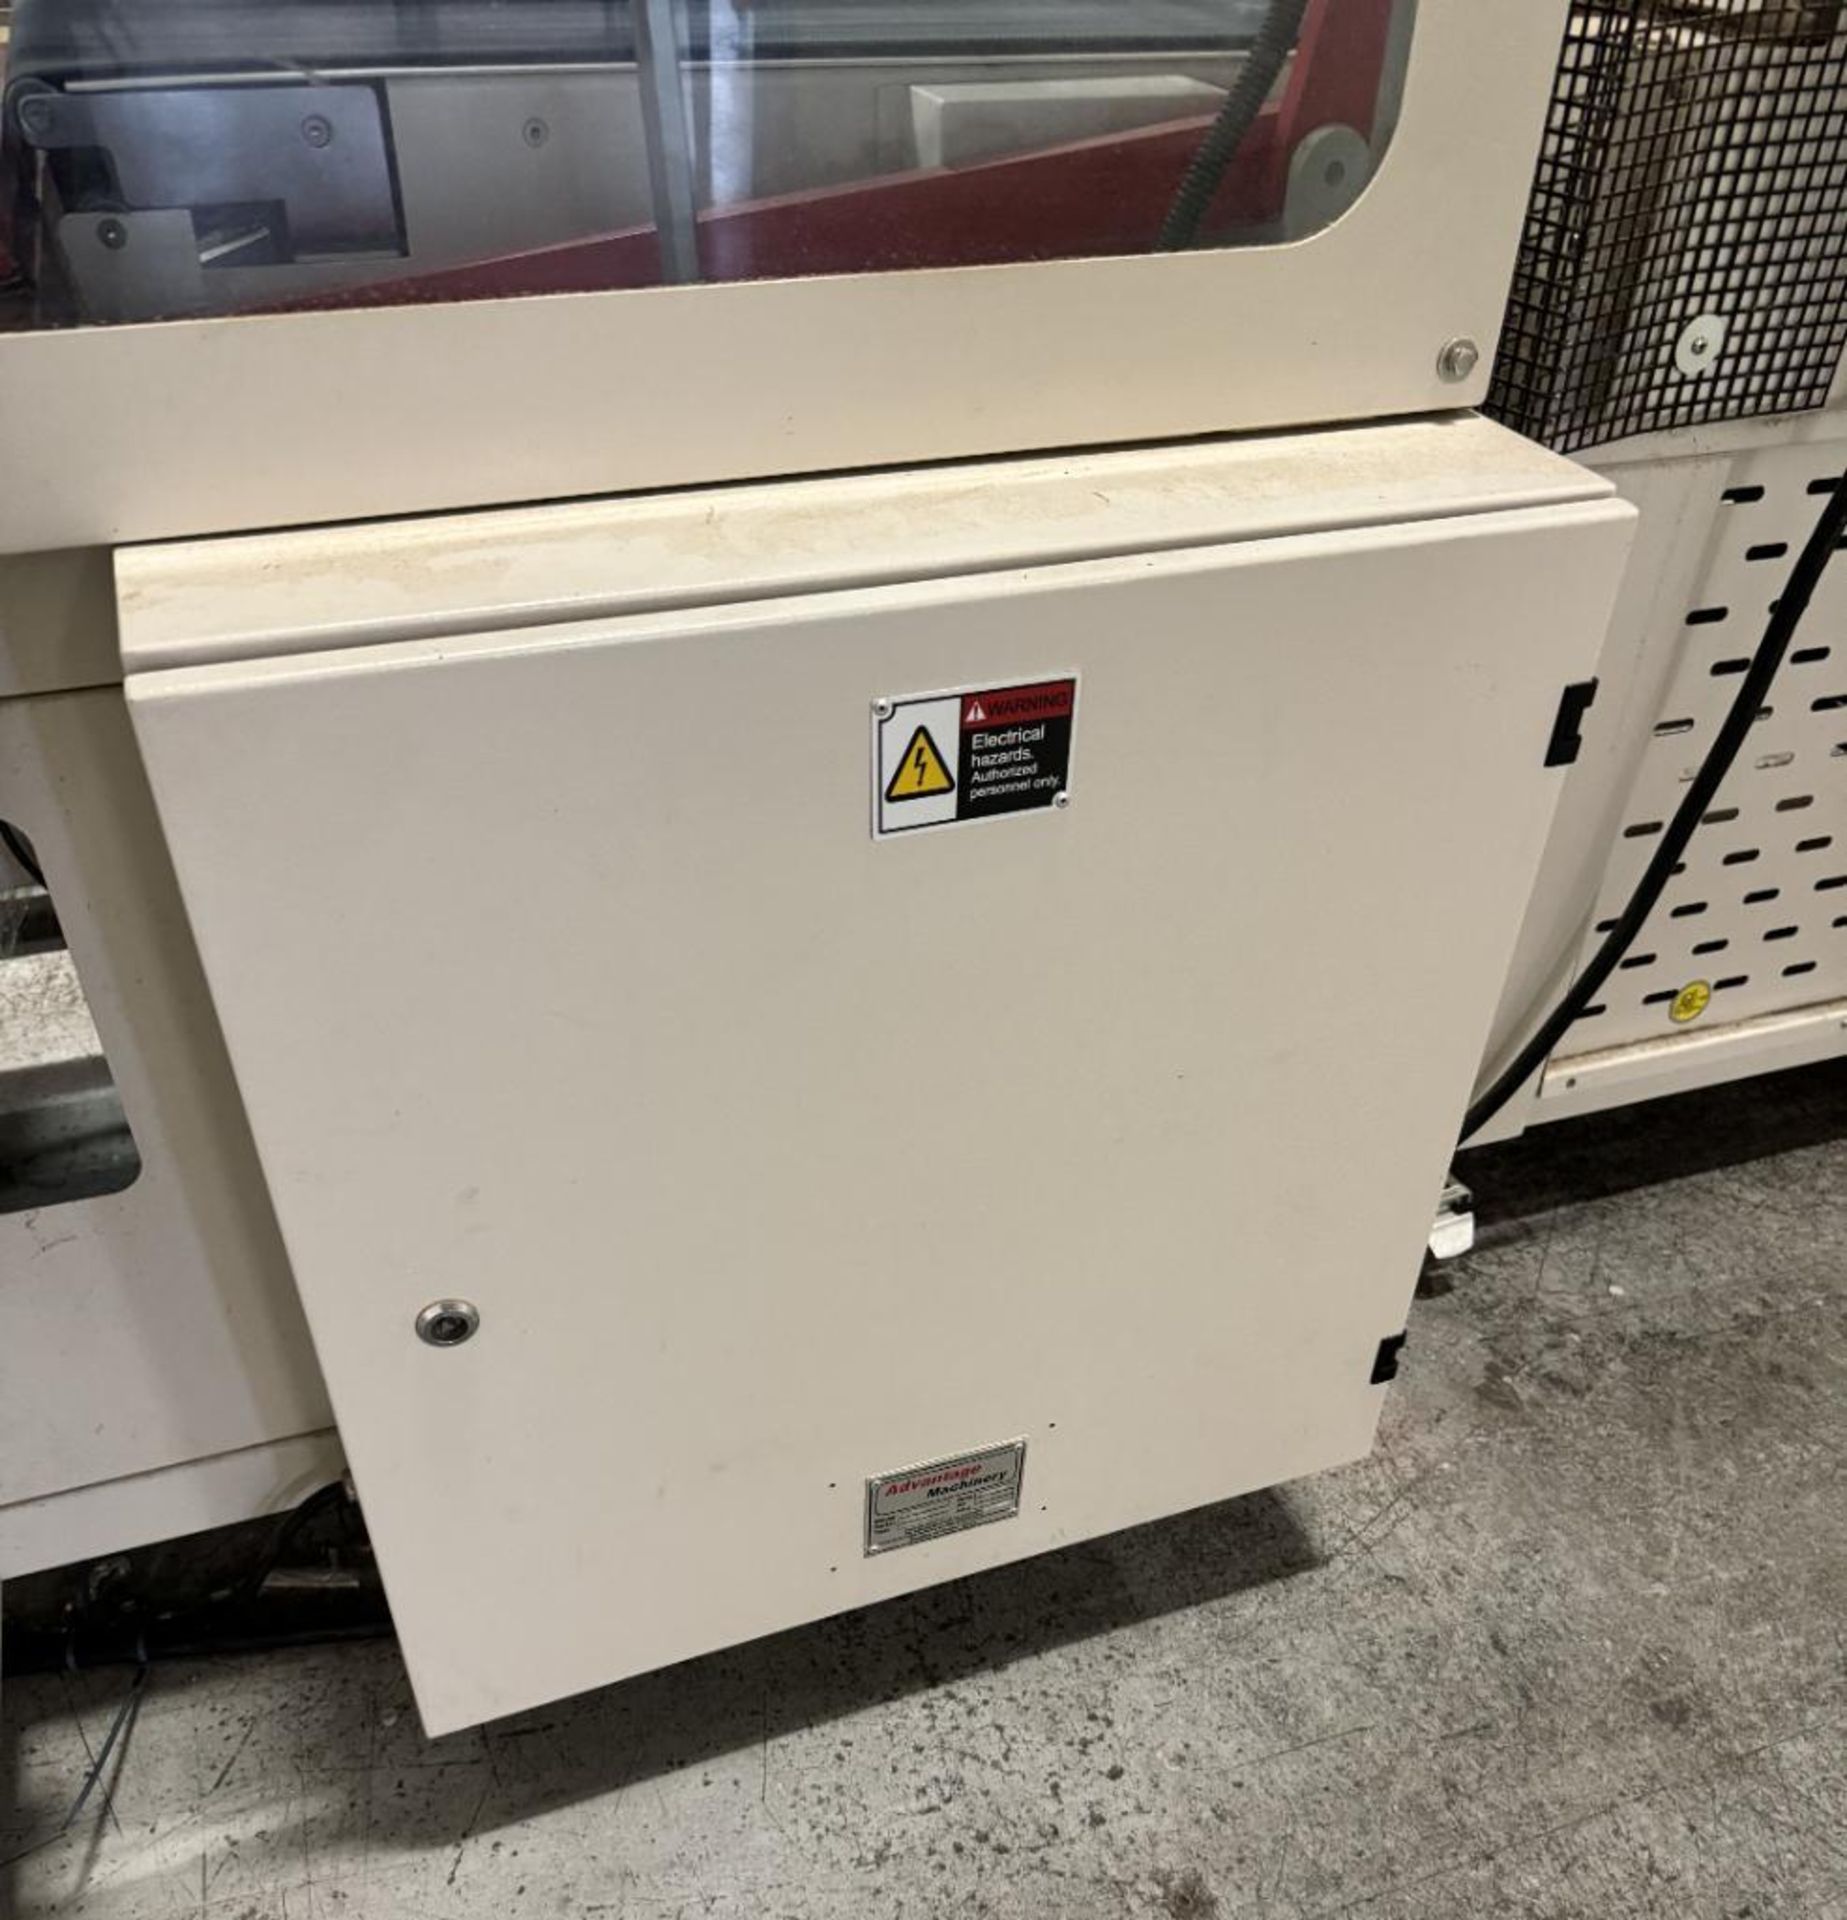 Advantage Machinery L-728 L-Bar Sealing Machine, Serial# 19-001156B, Built 2019. With belted conveyo - Image 11 of 18